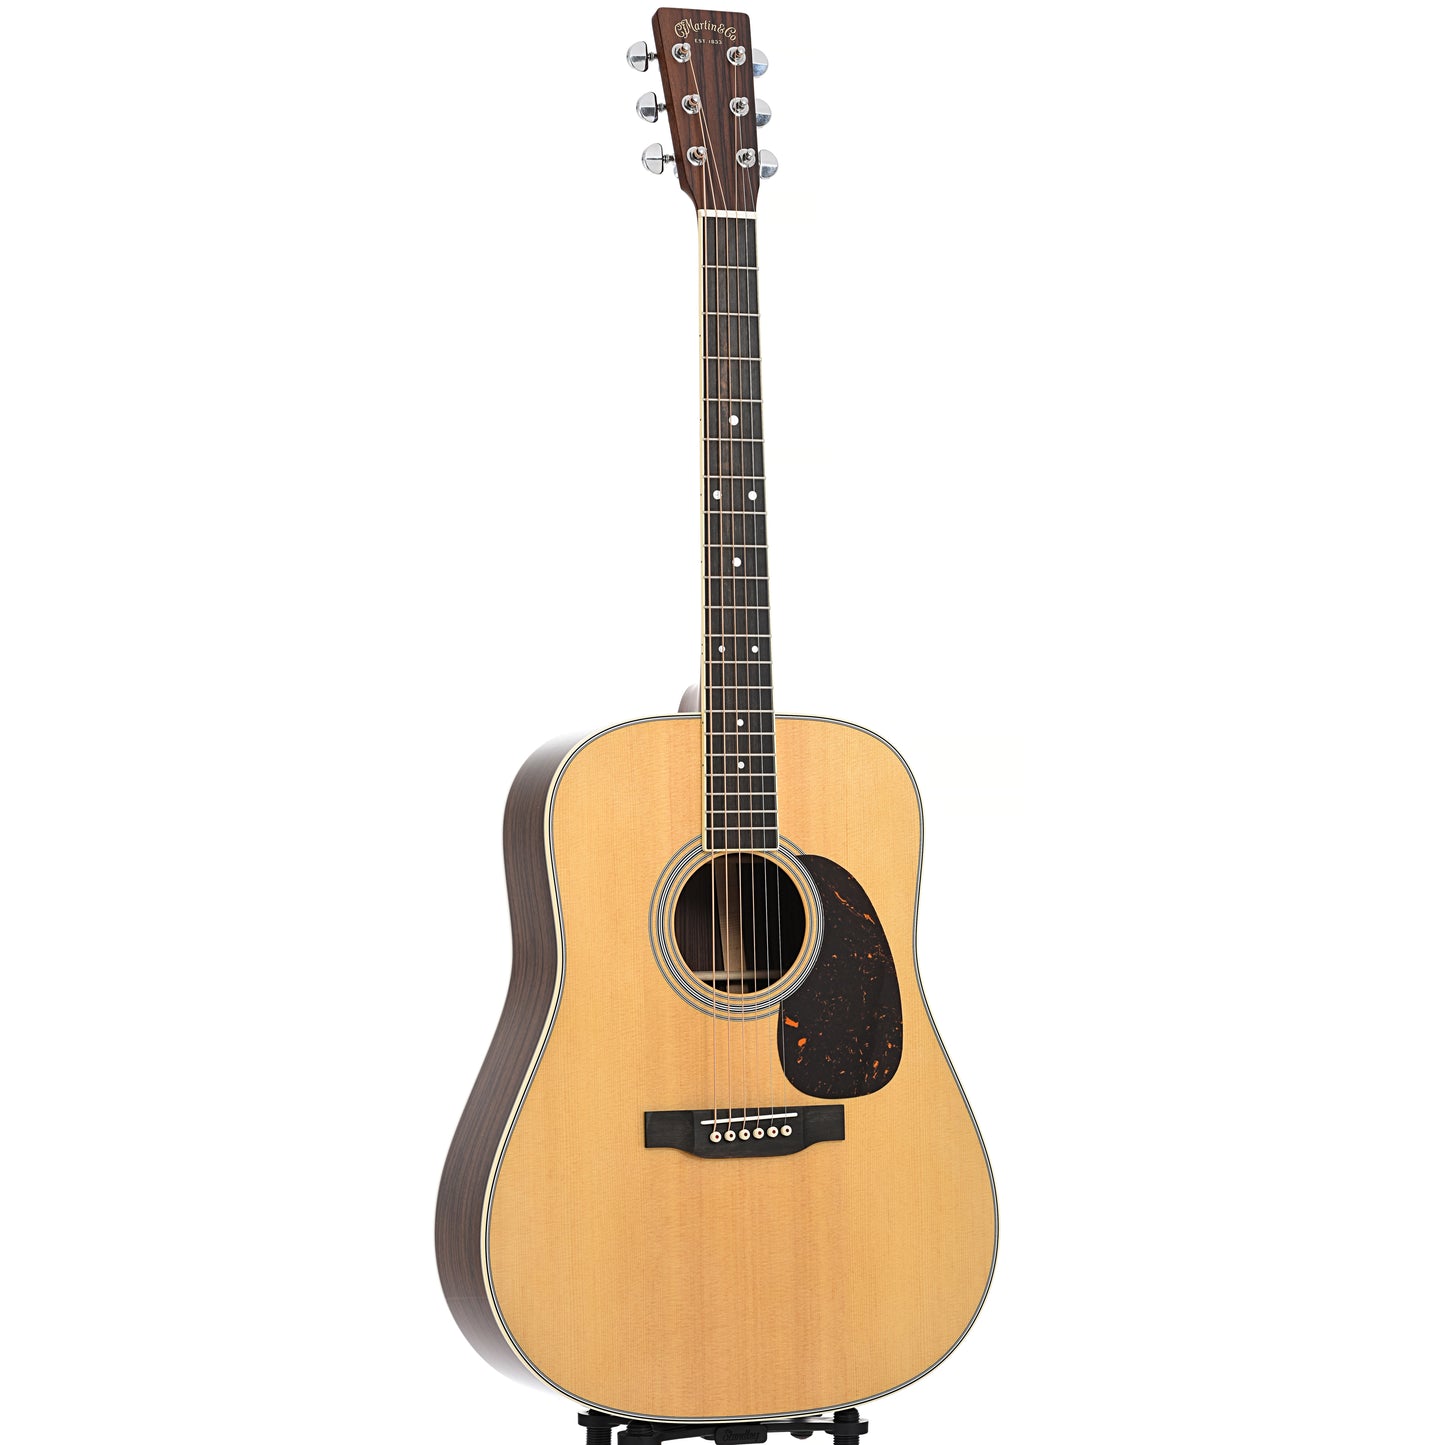 Full front and side of Martin D-35 Guitar